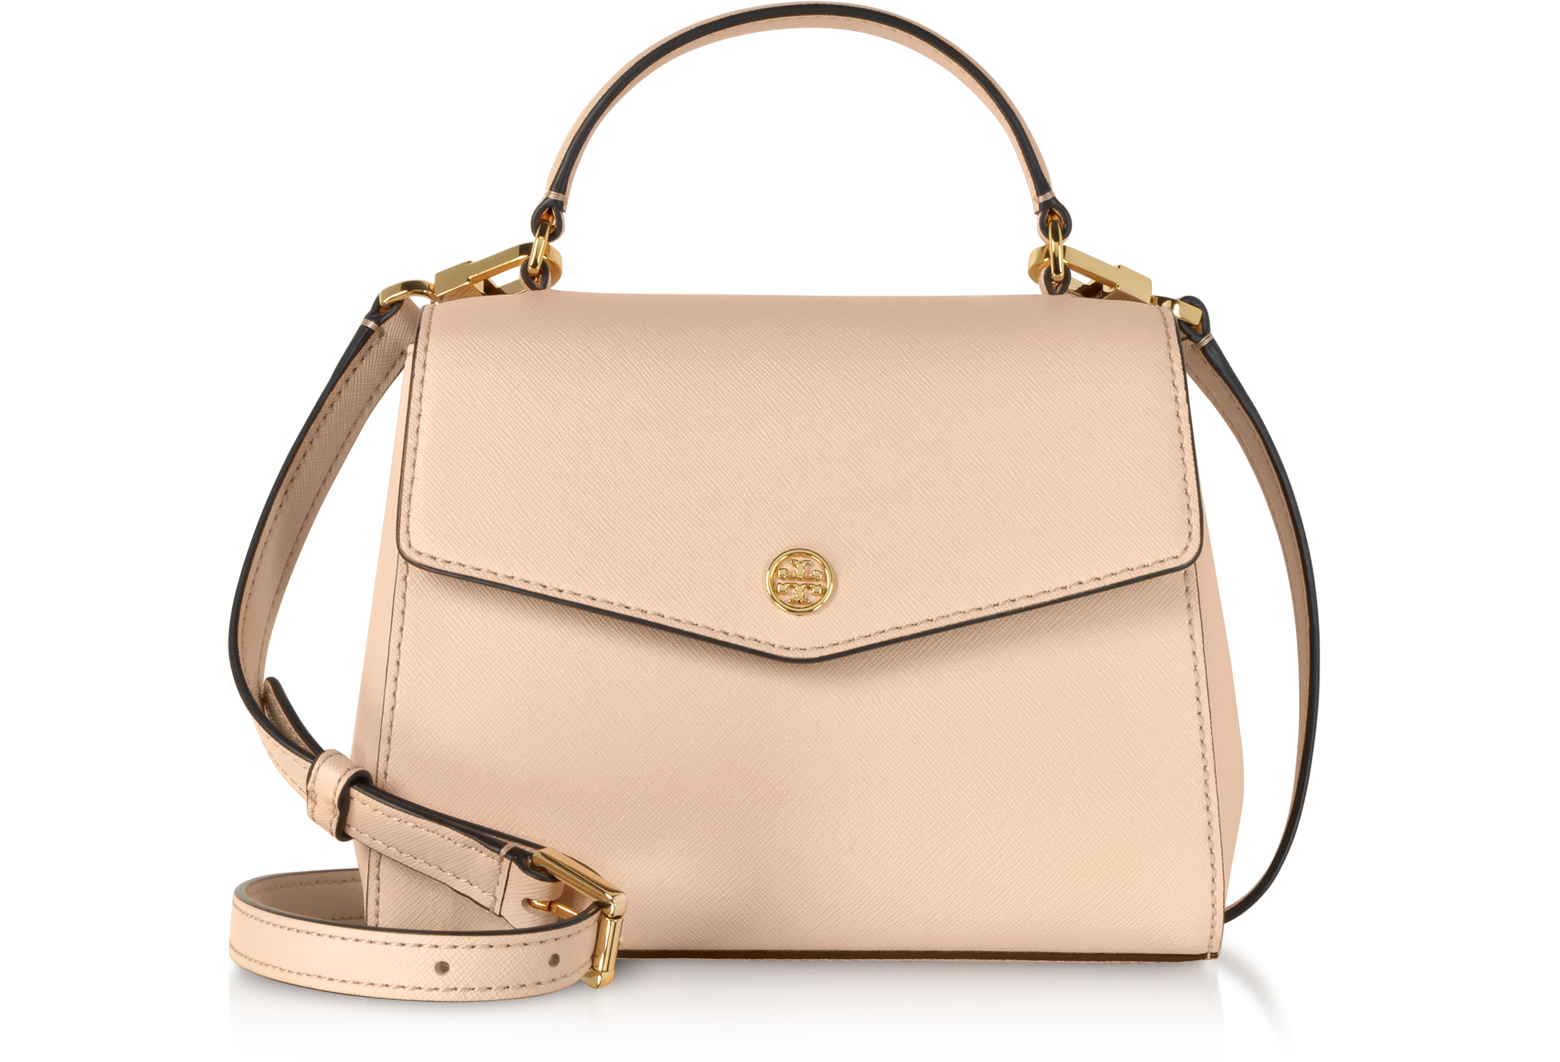 Tory Burch Pale Apricot Robinson Small Top-Handle Satchel Bag at FORZIERI  Canada